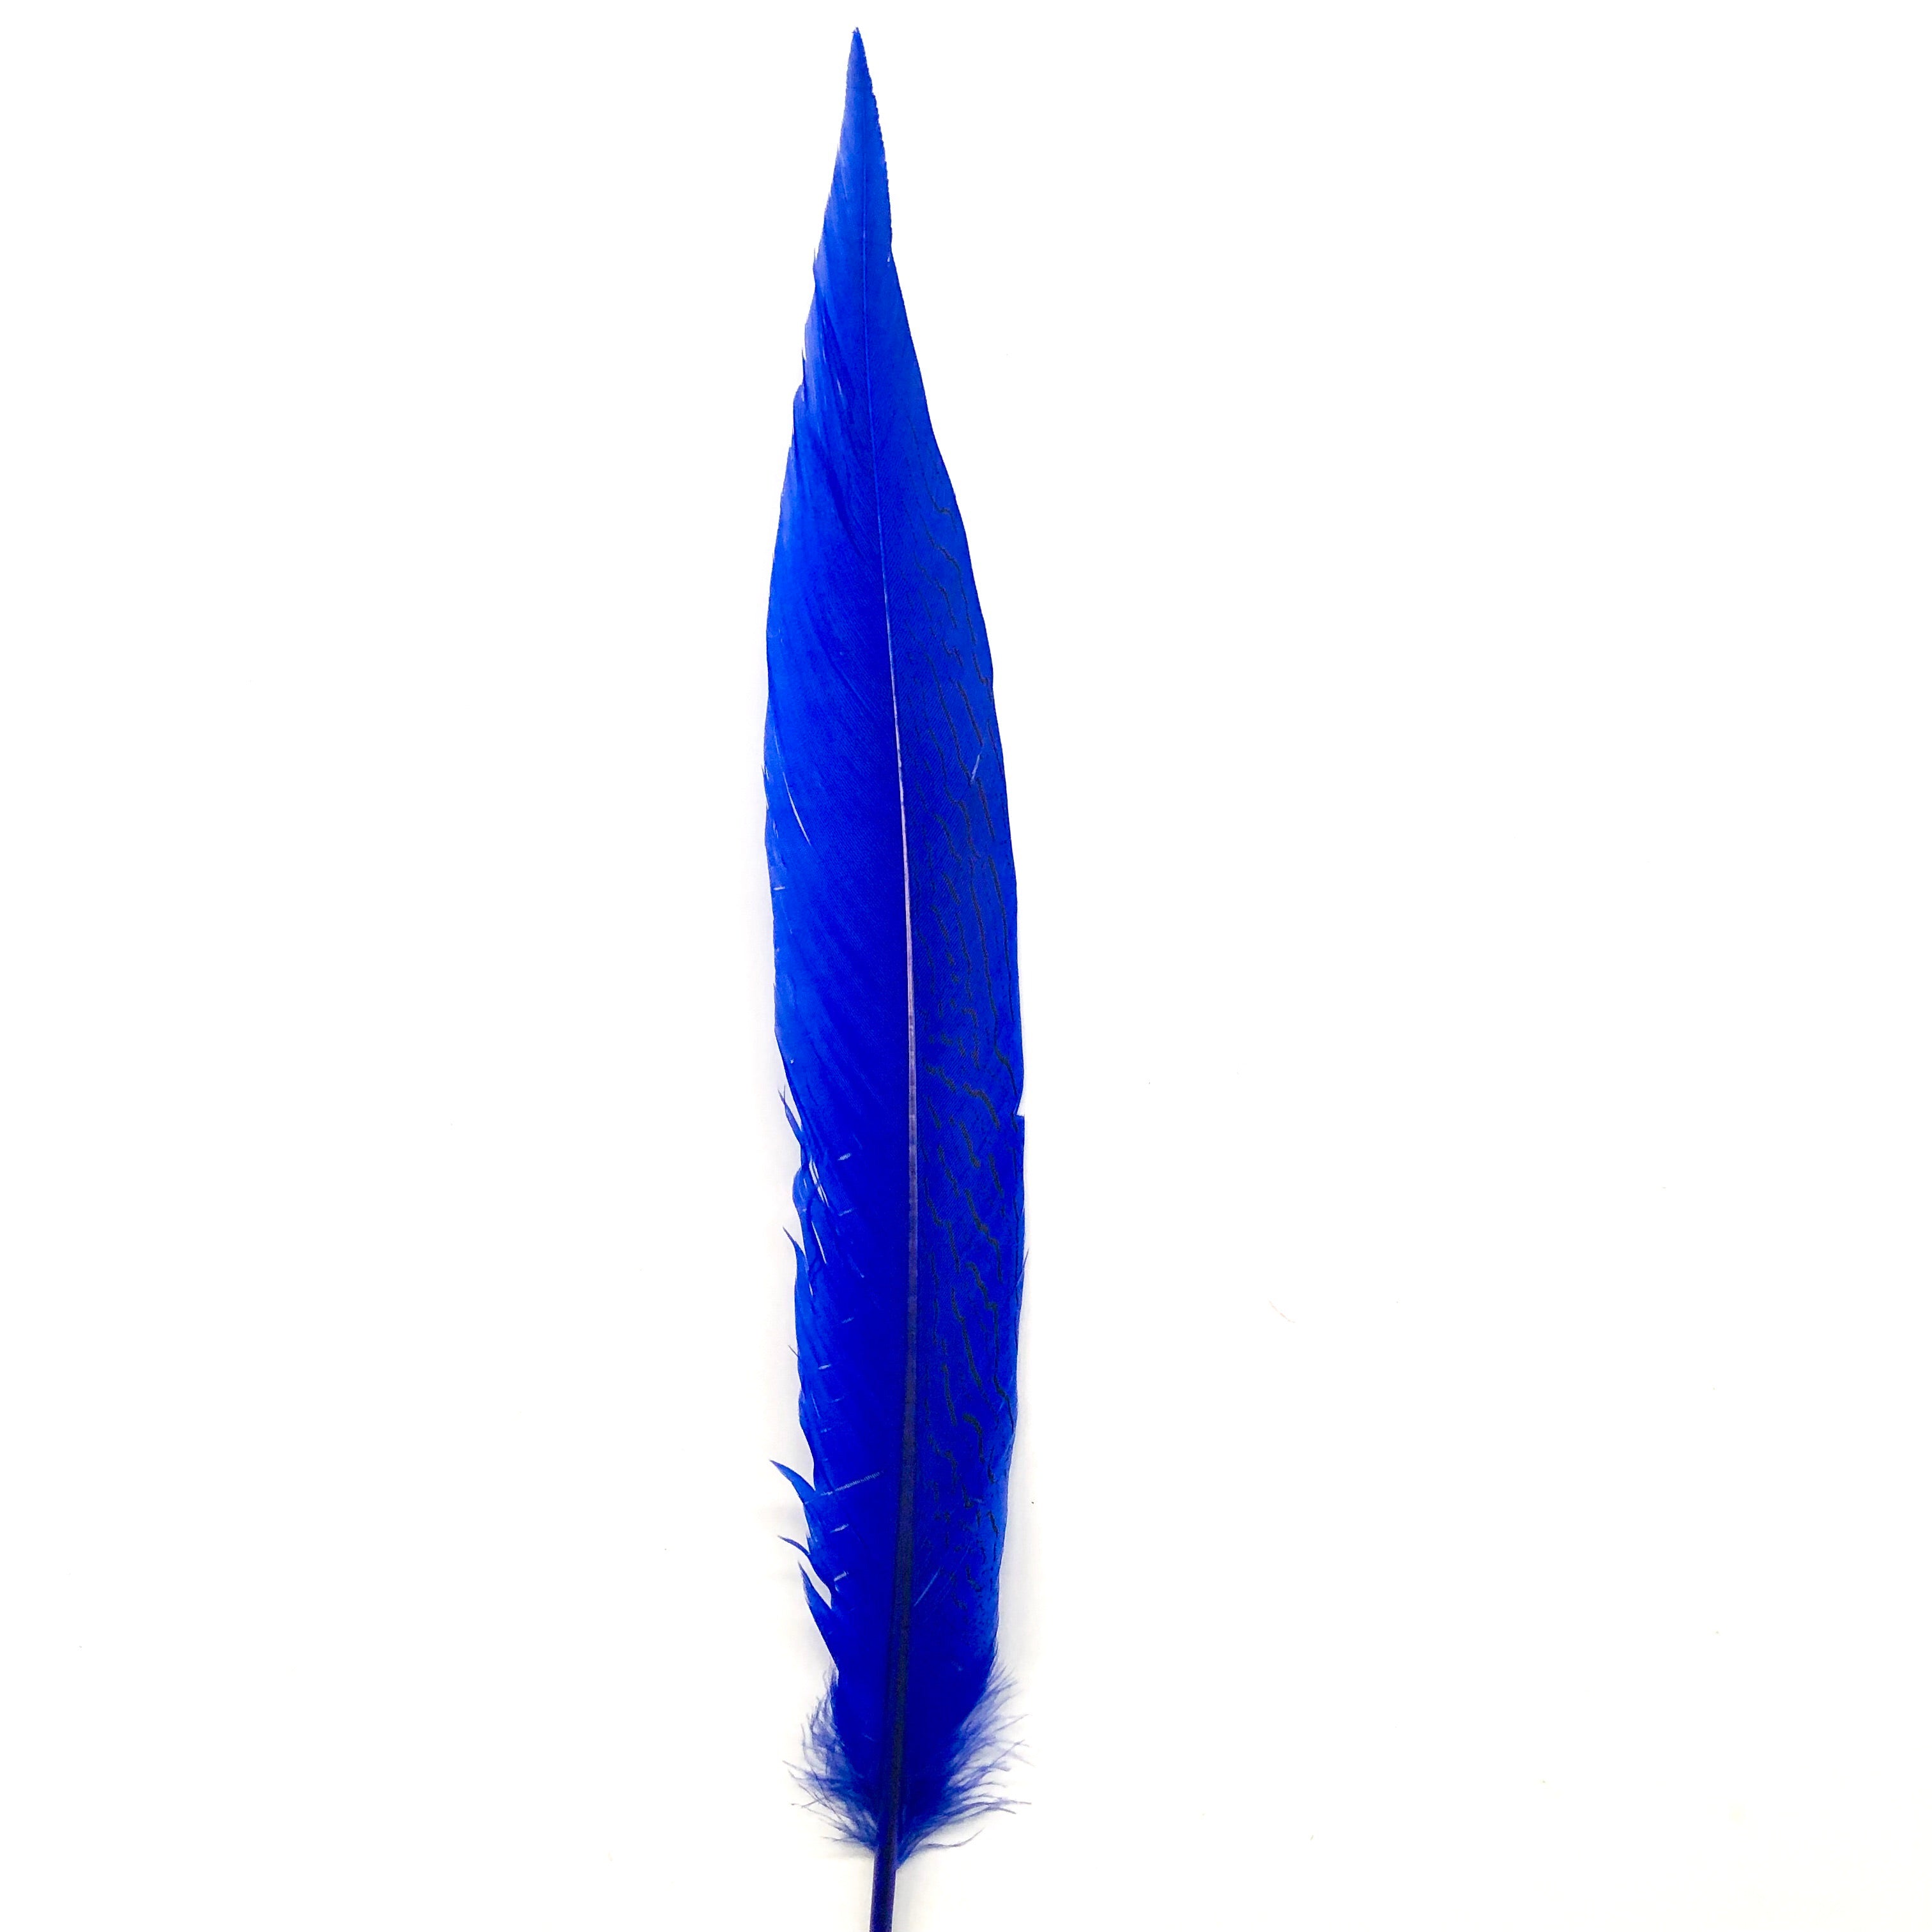 10" to 20" Silver Pheasant Tail Feather - Royal Blue